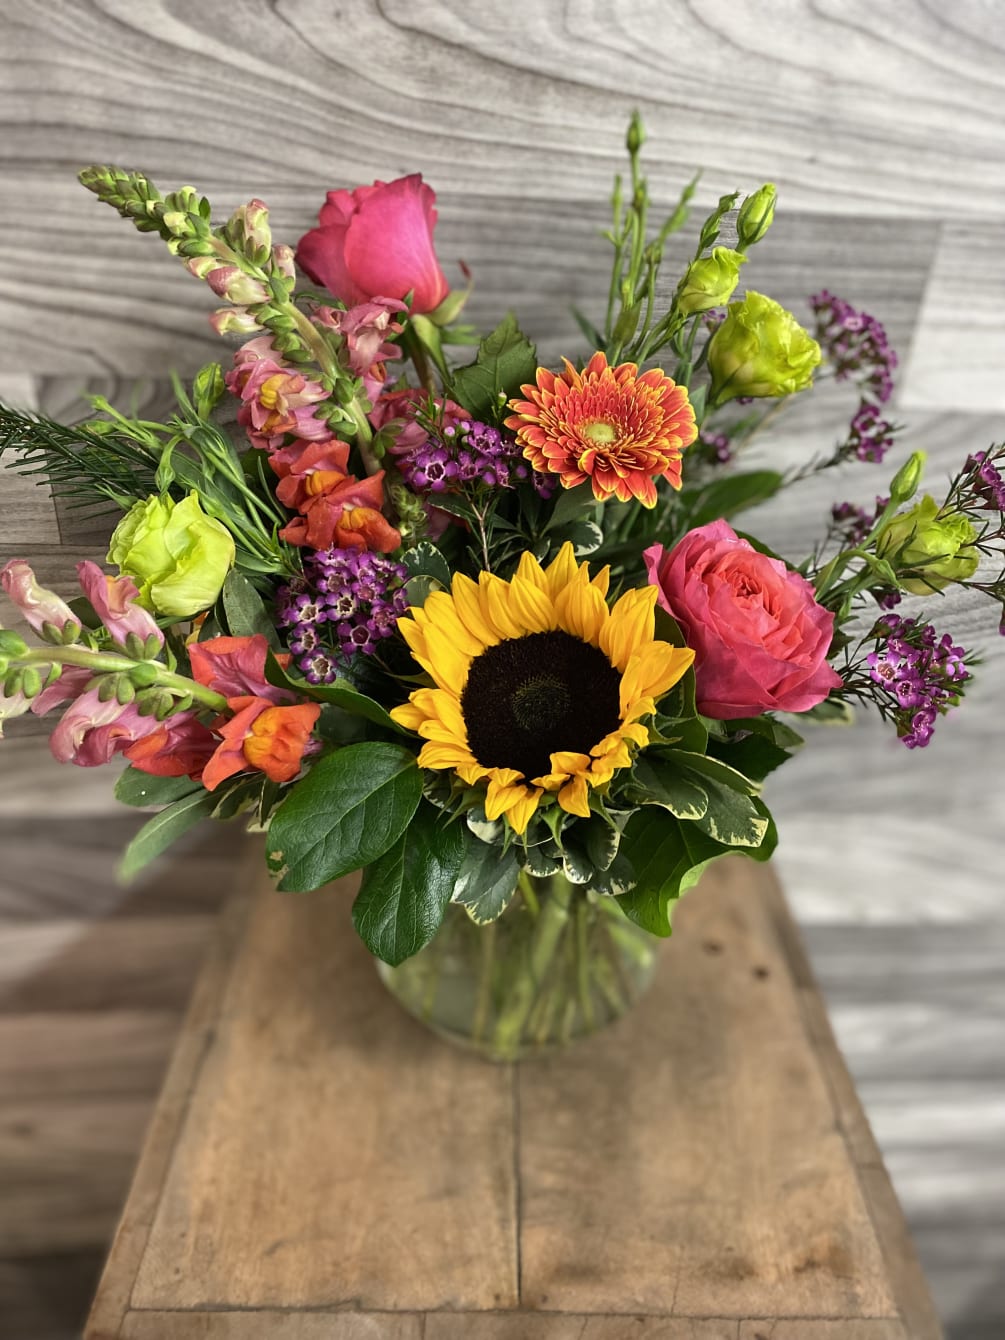 A pet friendly bouquet, perfect to send to a pet filled home!

All